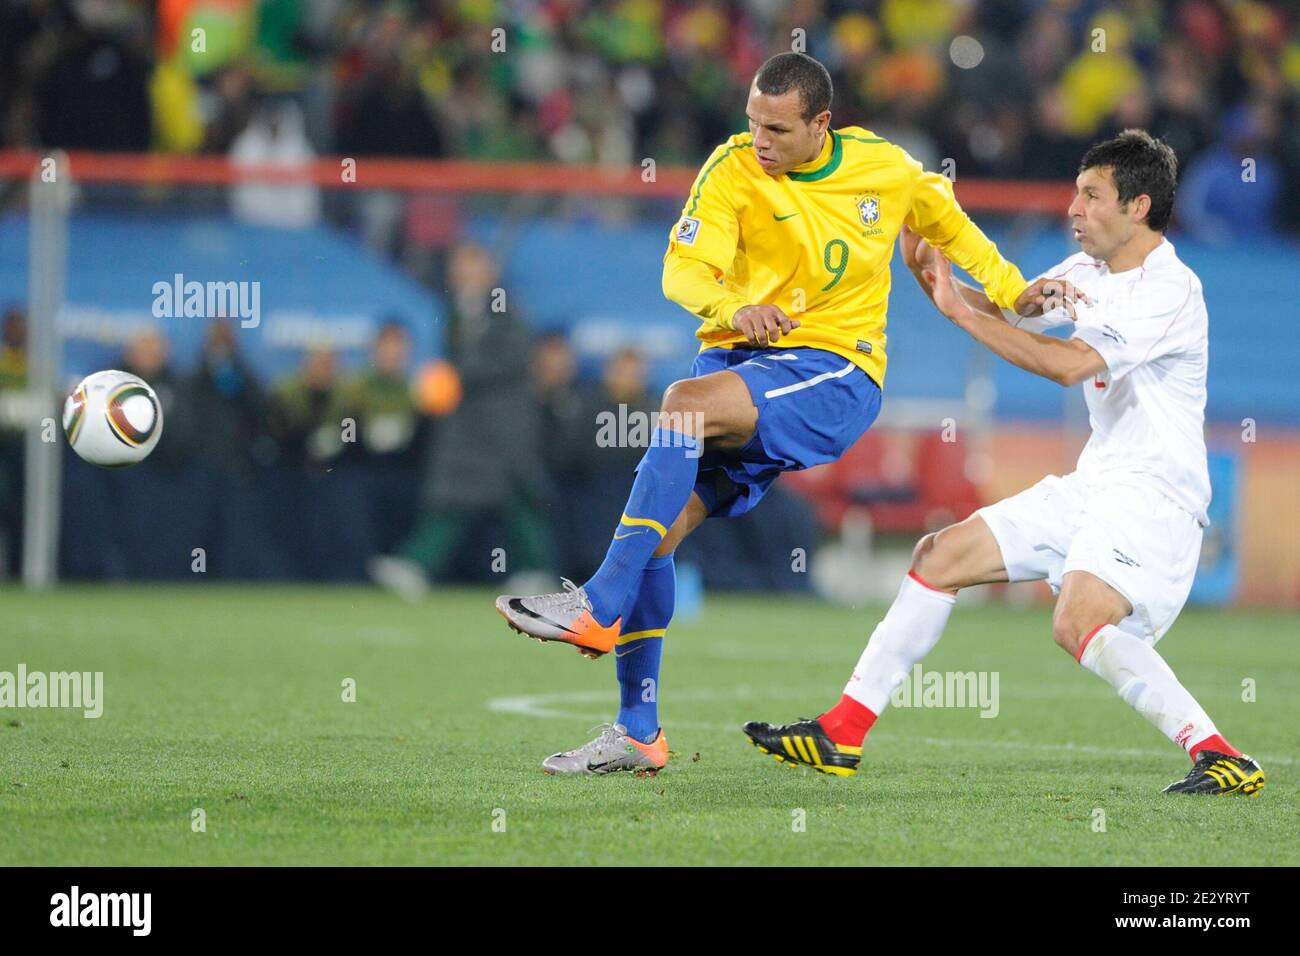 Brazil's Luis Fabiano during the 2010 FIFA World Cup South Africa 1/8 of final Soccer match, Brazil vs Chile at Ellis Park football stadium in Johannesburg, South Africa on June 28, 2010. Brazil won 3-0. Photo by Henri Szwarc/Cameleon/ABACAPRESS.COM Stock Photo